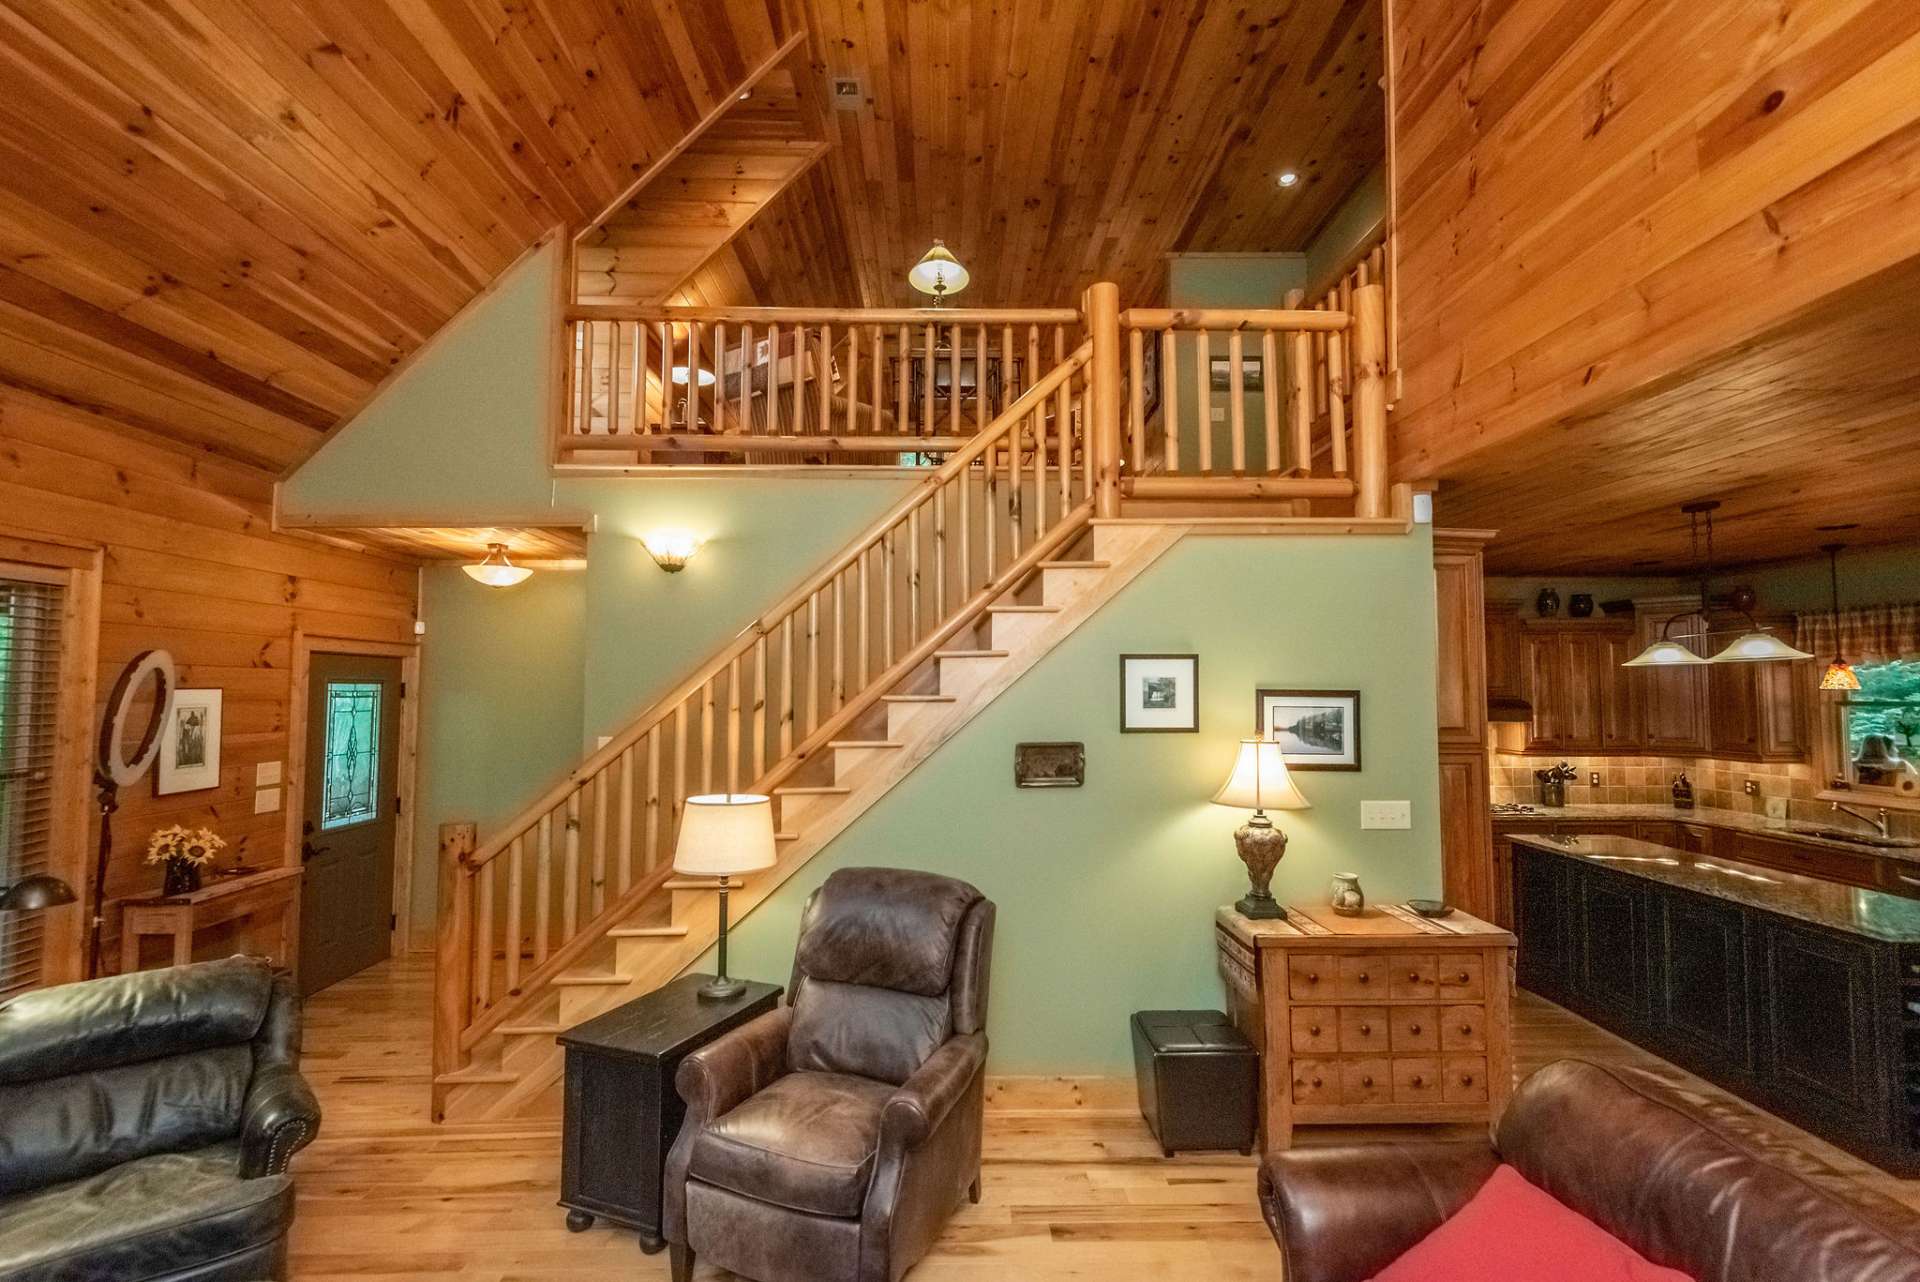 Vaulted ceilings open up to the loft area. Rustic railing leads the way.